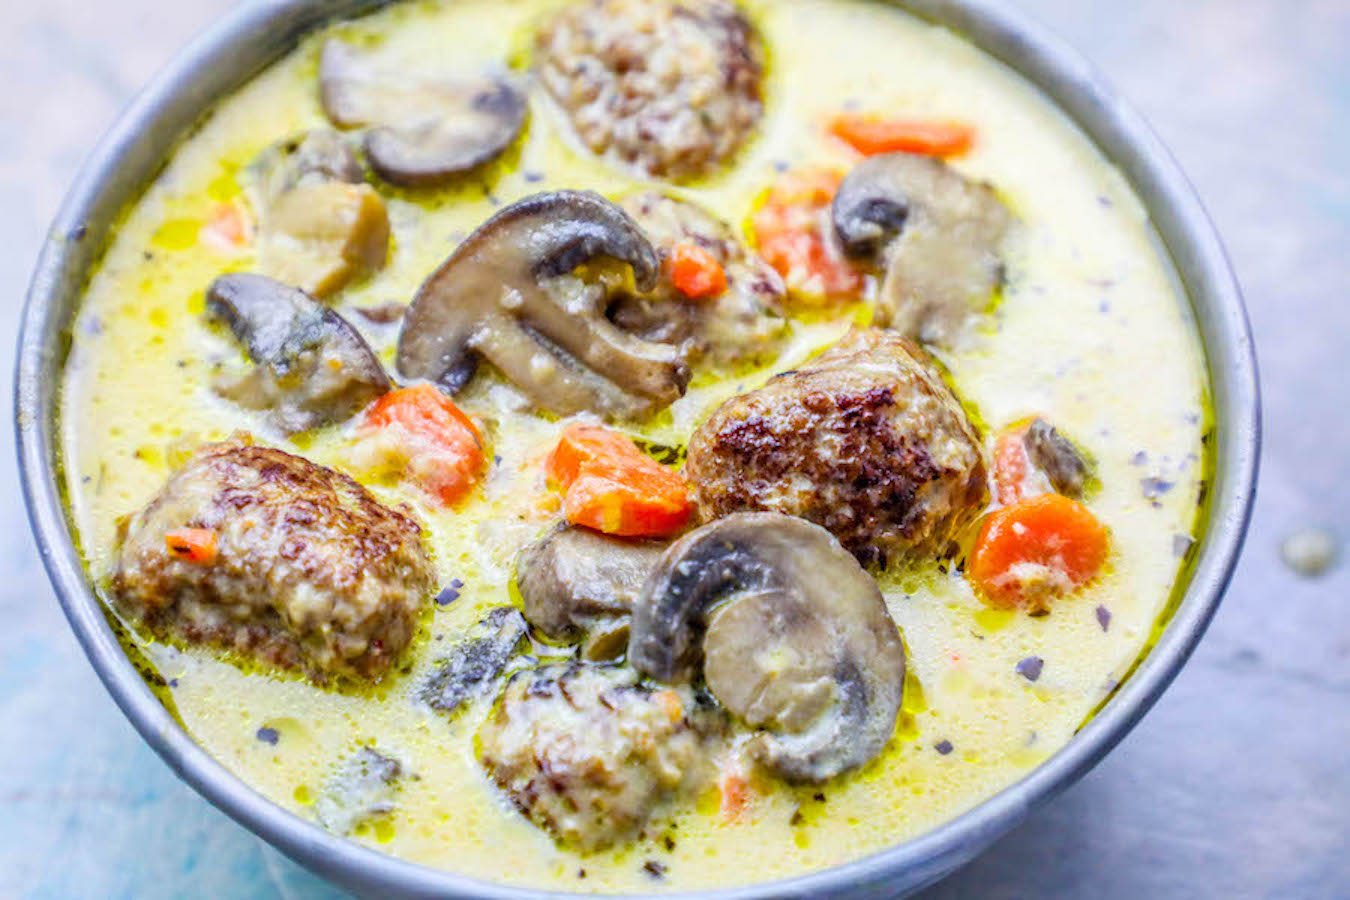 meatballs in a creamy soup with carrot and mushrooms